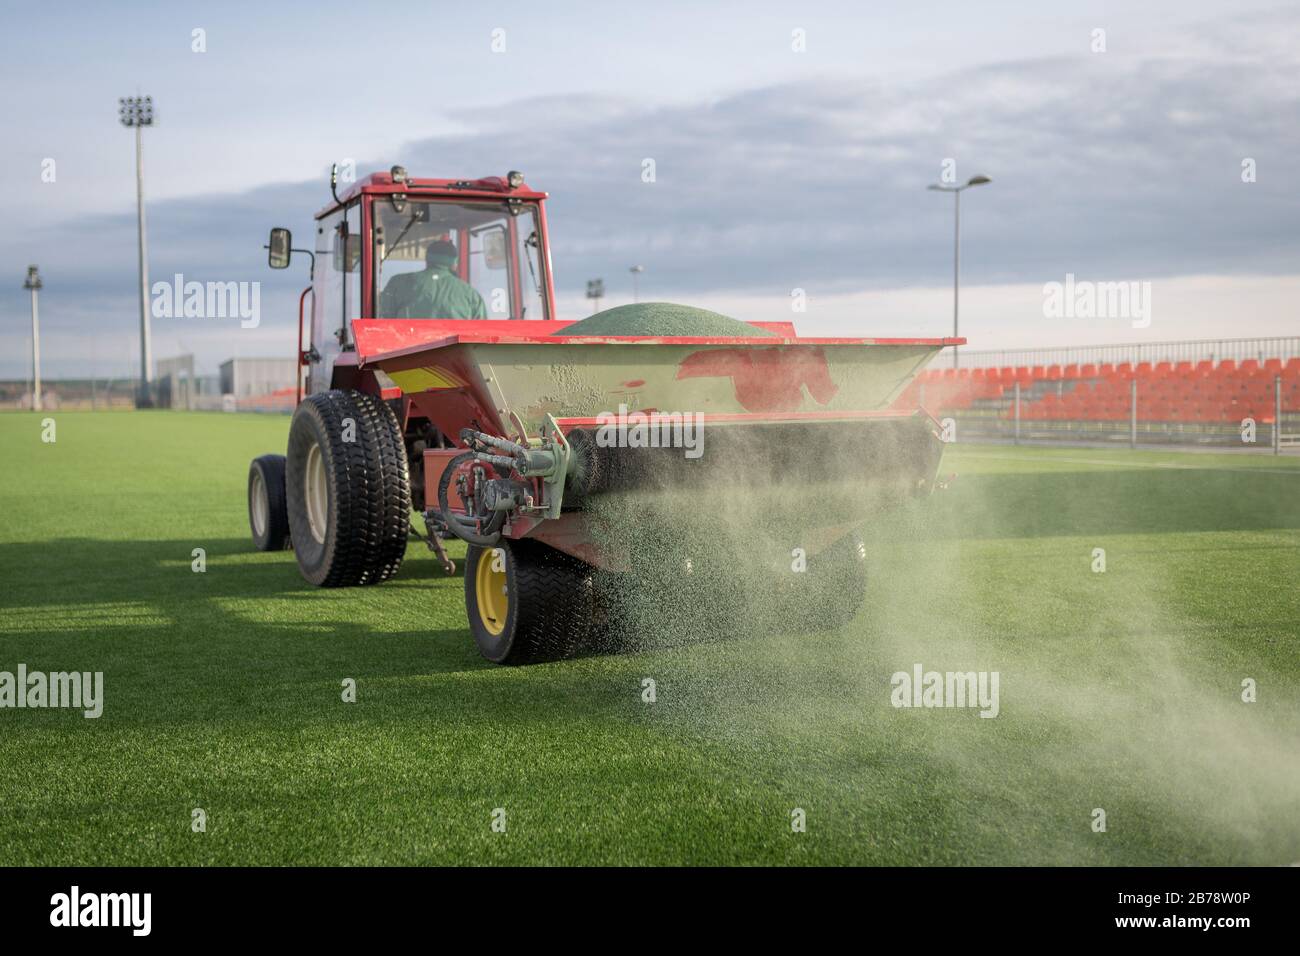 Pouring infill granules in to a football pitch with artificial grass. Stock Photo